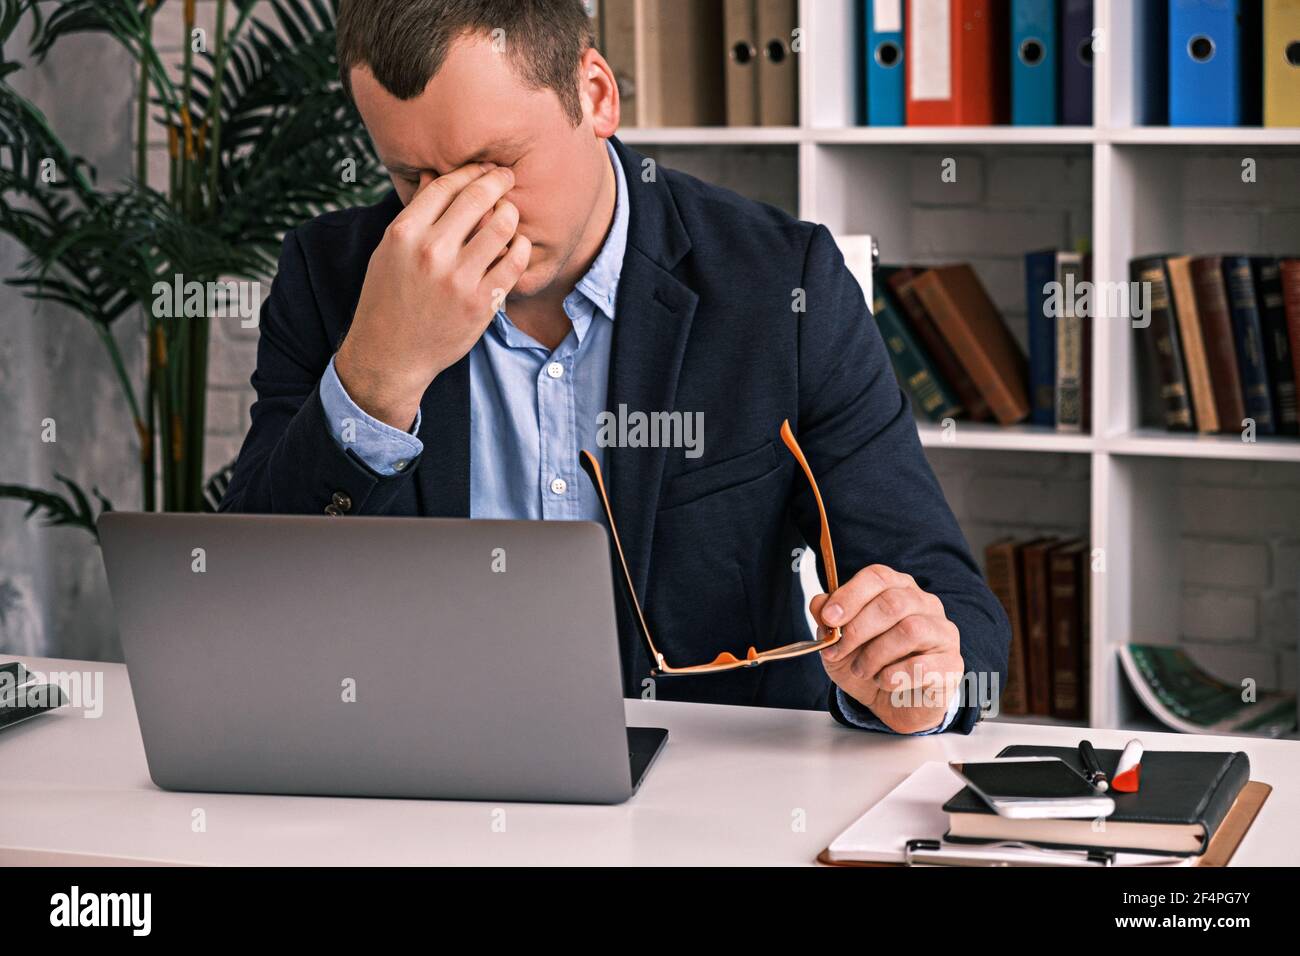 Eye fatigue, poor eyesight, office work. The young man takes off his glasses and rubs his eyes with his hand sitting at a table with a laptop in a sui Stock Photo